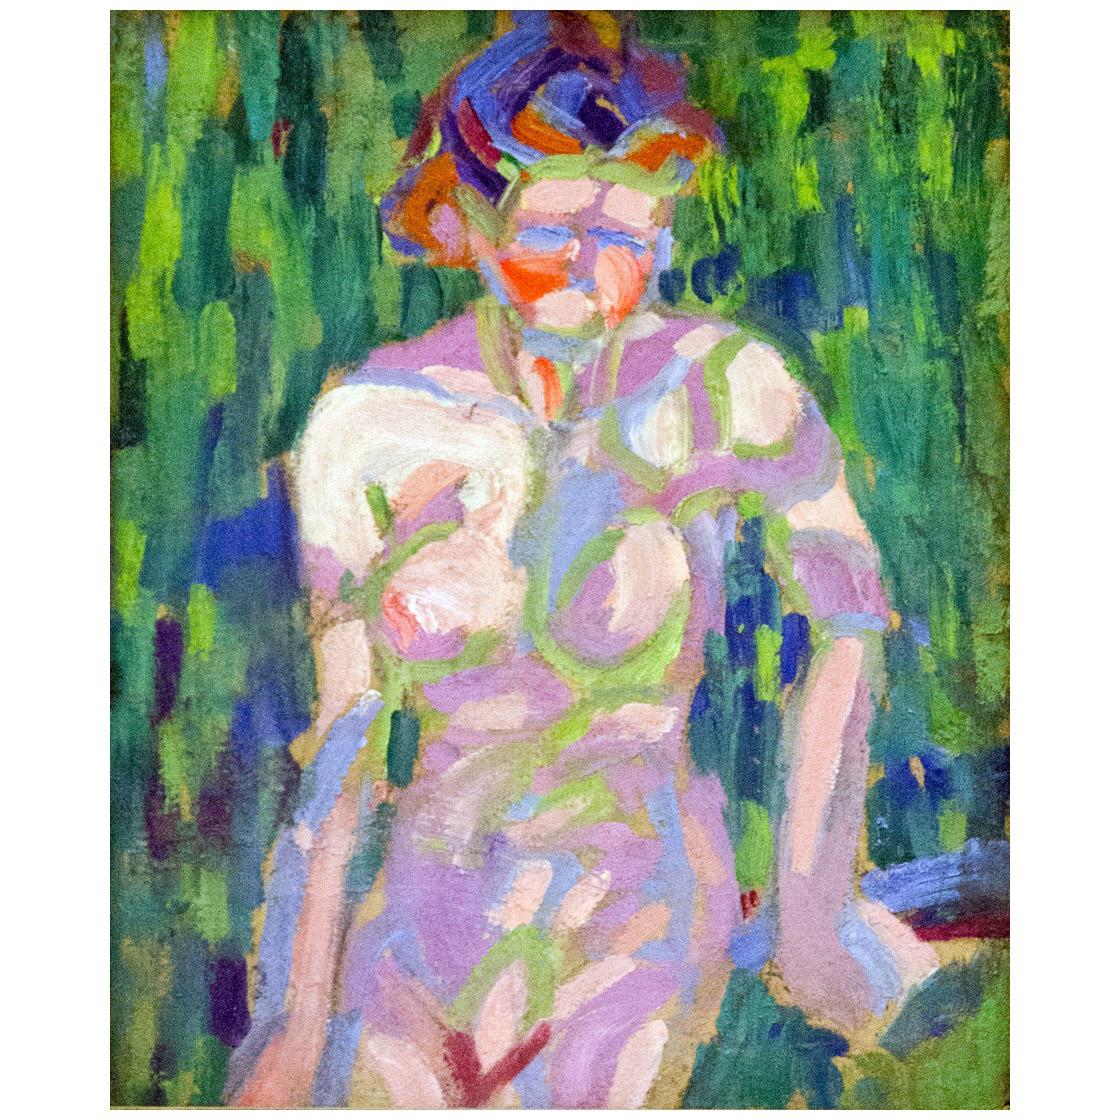 Ernst Ludwig Kirchner. Female Nude with Foliage Shadows. 1905. Kirchner Museum Davos